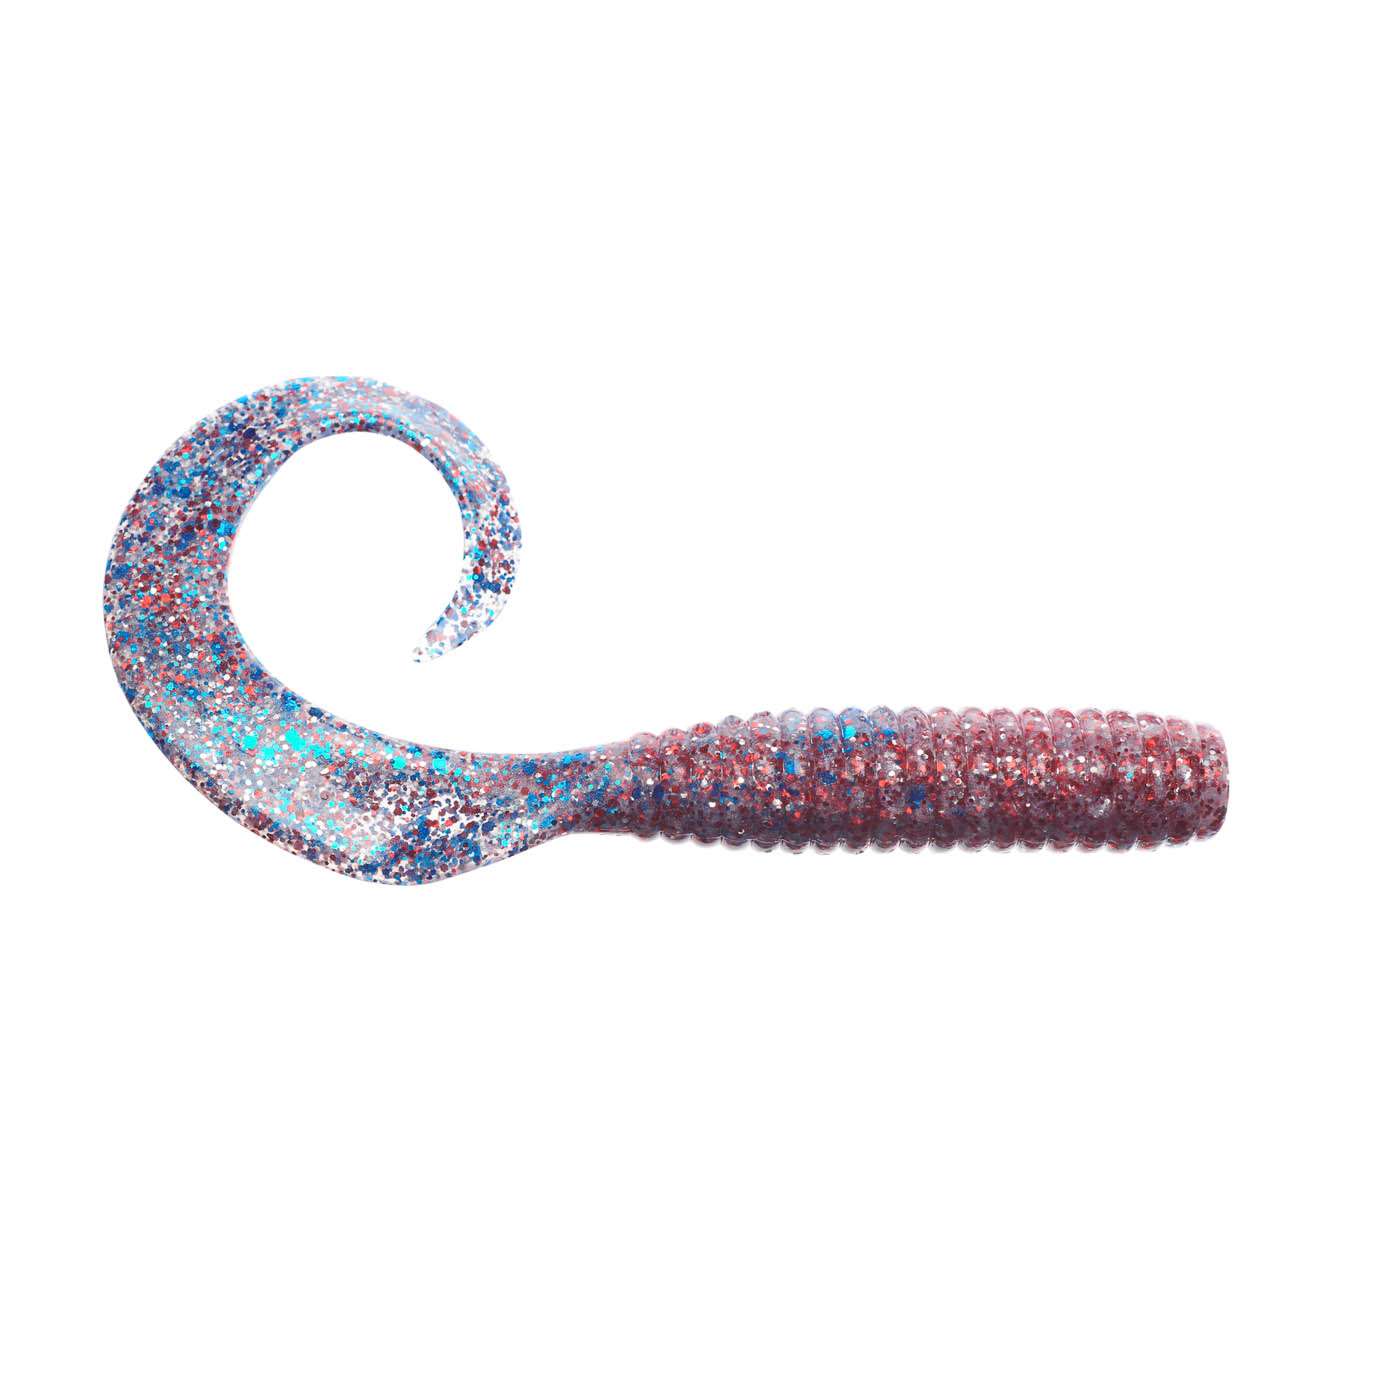 <p><strong>Berkley Gulp! Grub</strong></p><p>The grub is back and the Berkley Gulp version is a must for any tacklebox. Extreme scent dispersion expands the strike zone, attracting bass from greater distances. This grubâs long, curly tail swims under all conditions, adding to the versatility of one of the most versatile of all soft plastic baits. Available in 4-, 5- and 6-inch models. Now available in Firetail colors. $6.99. <a href=